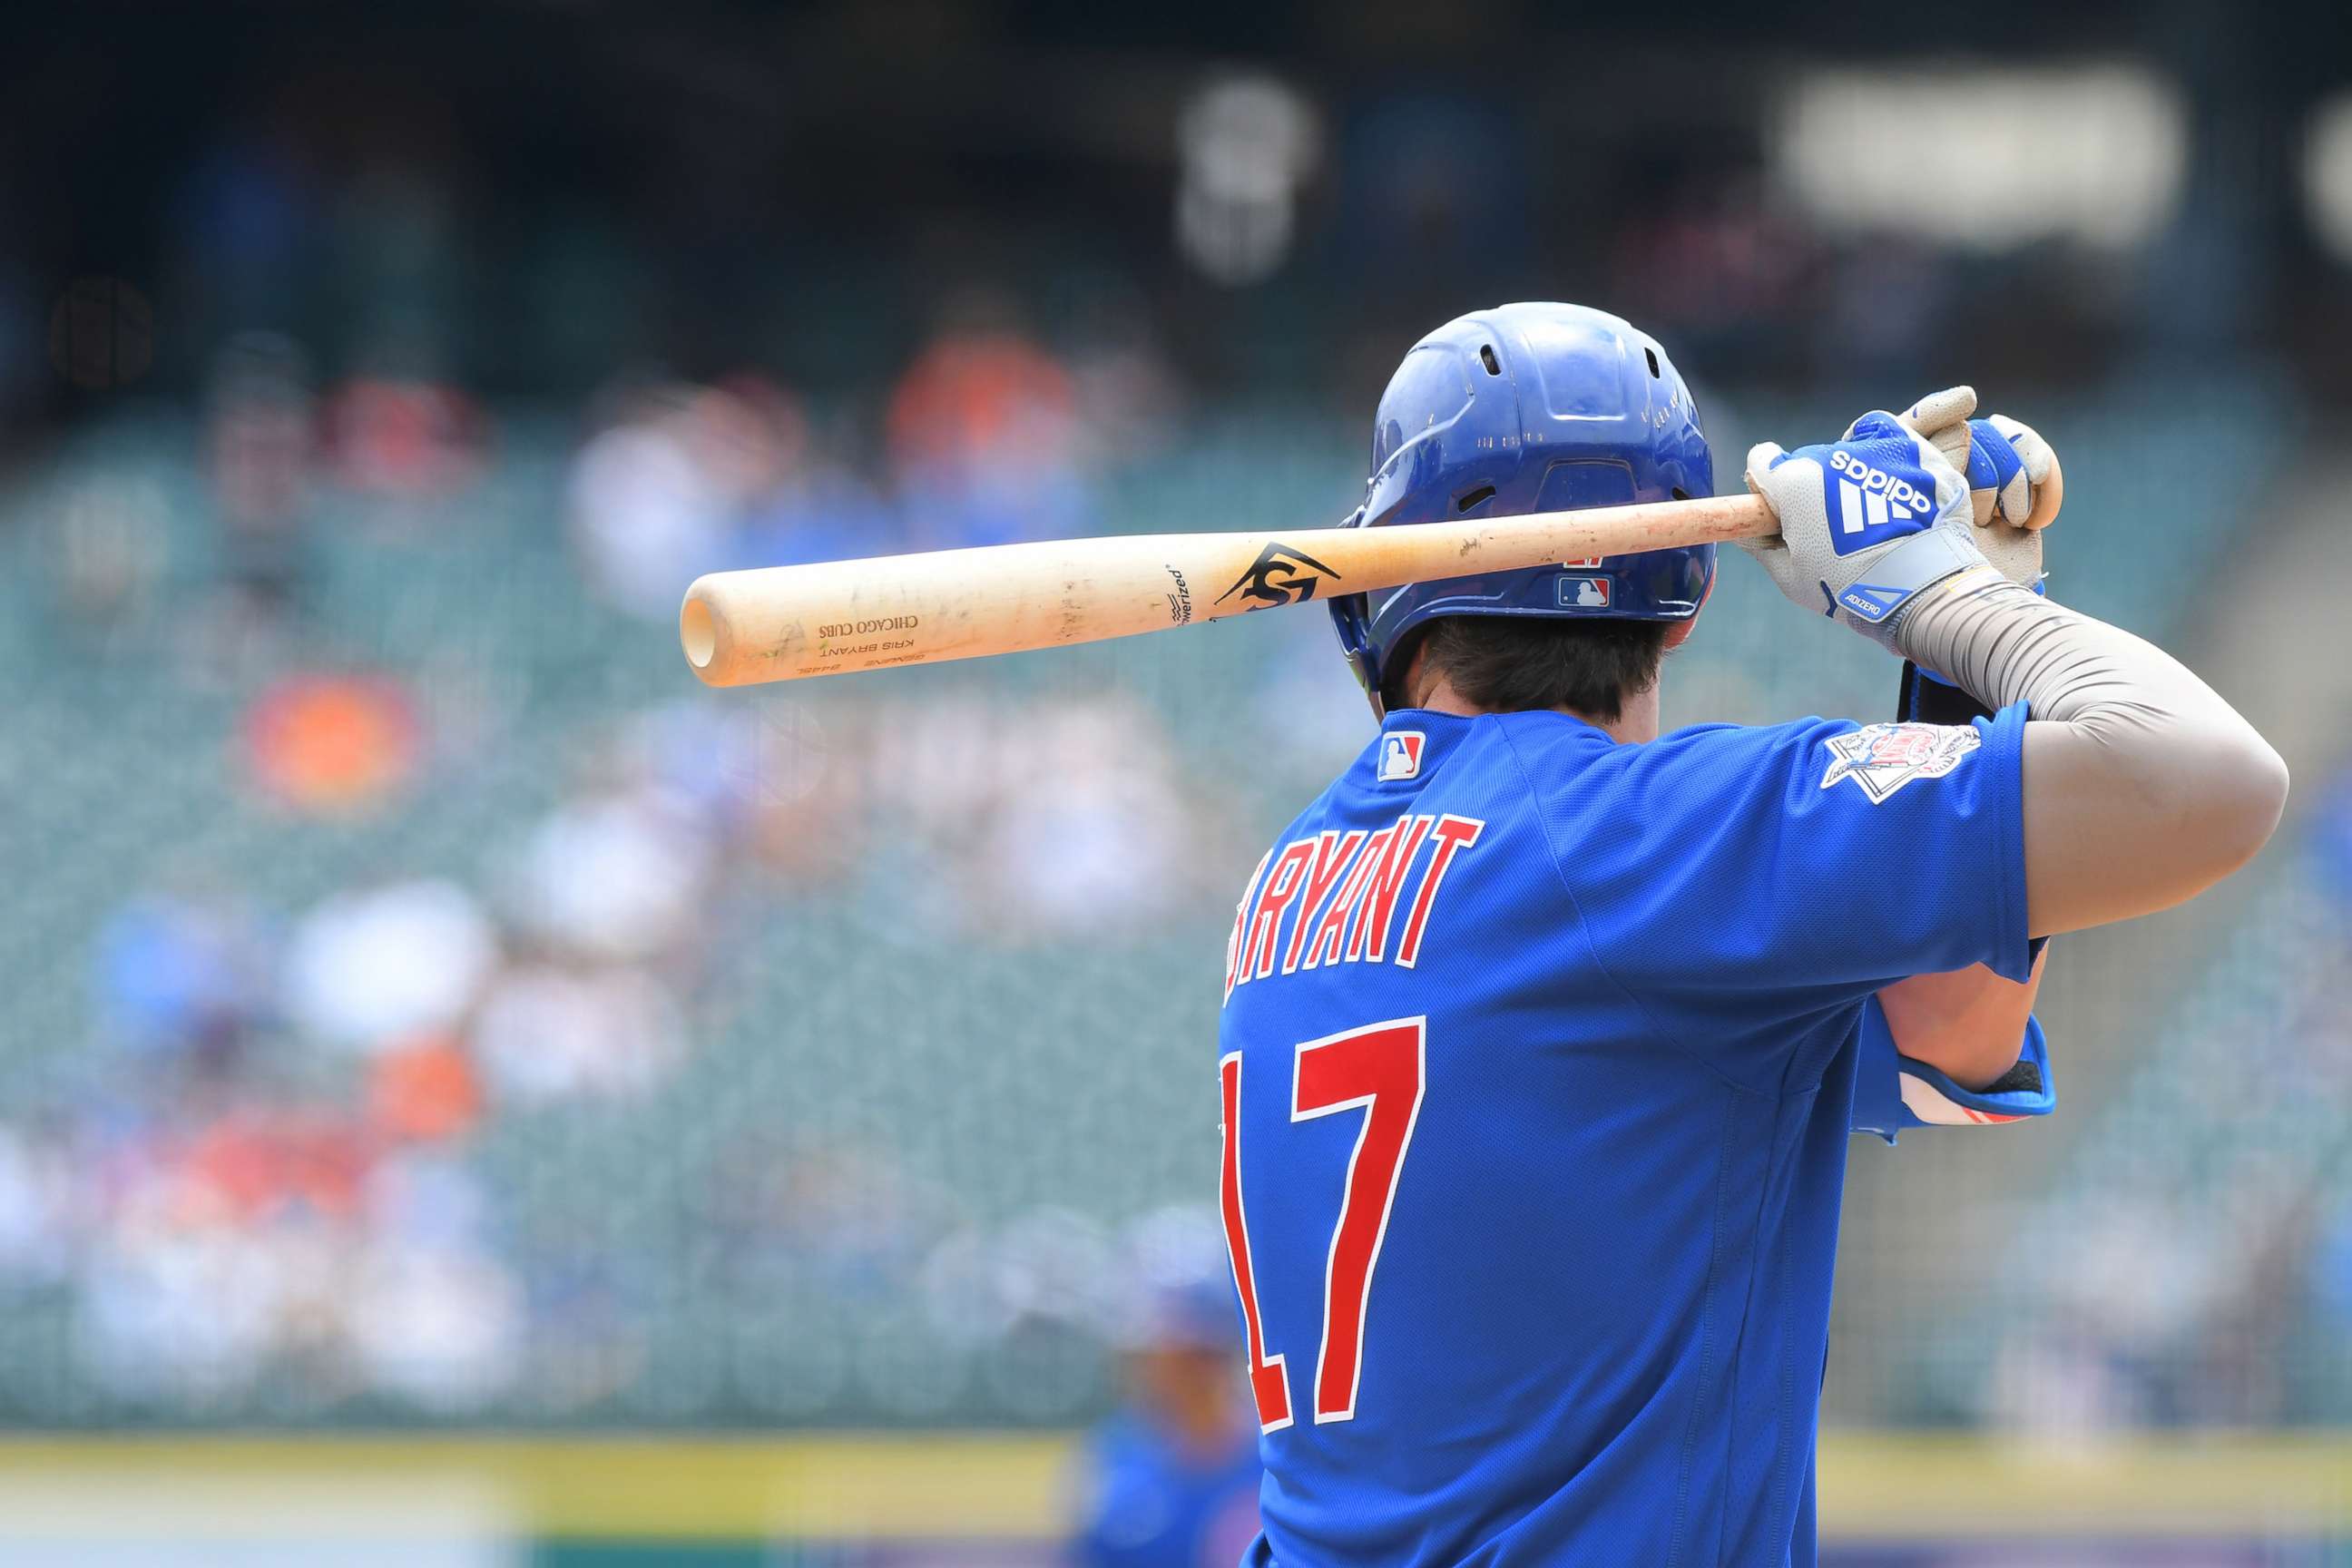 PHOTO: Kris Bryant of the Chicago Cubs bats during the game against the Detroit Tigers in Detroit, May 16, 2021.